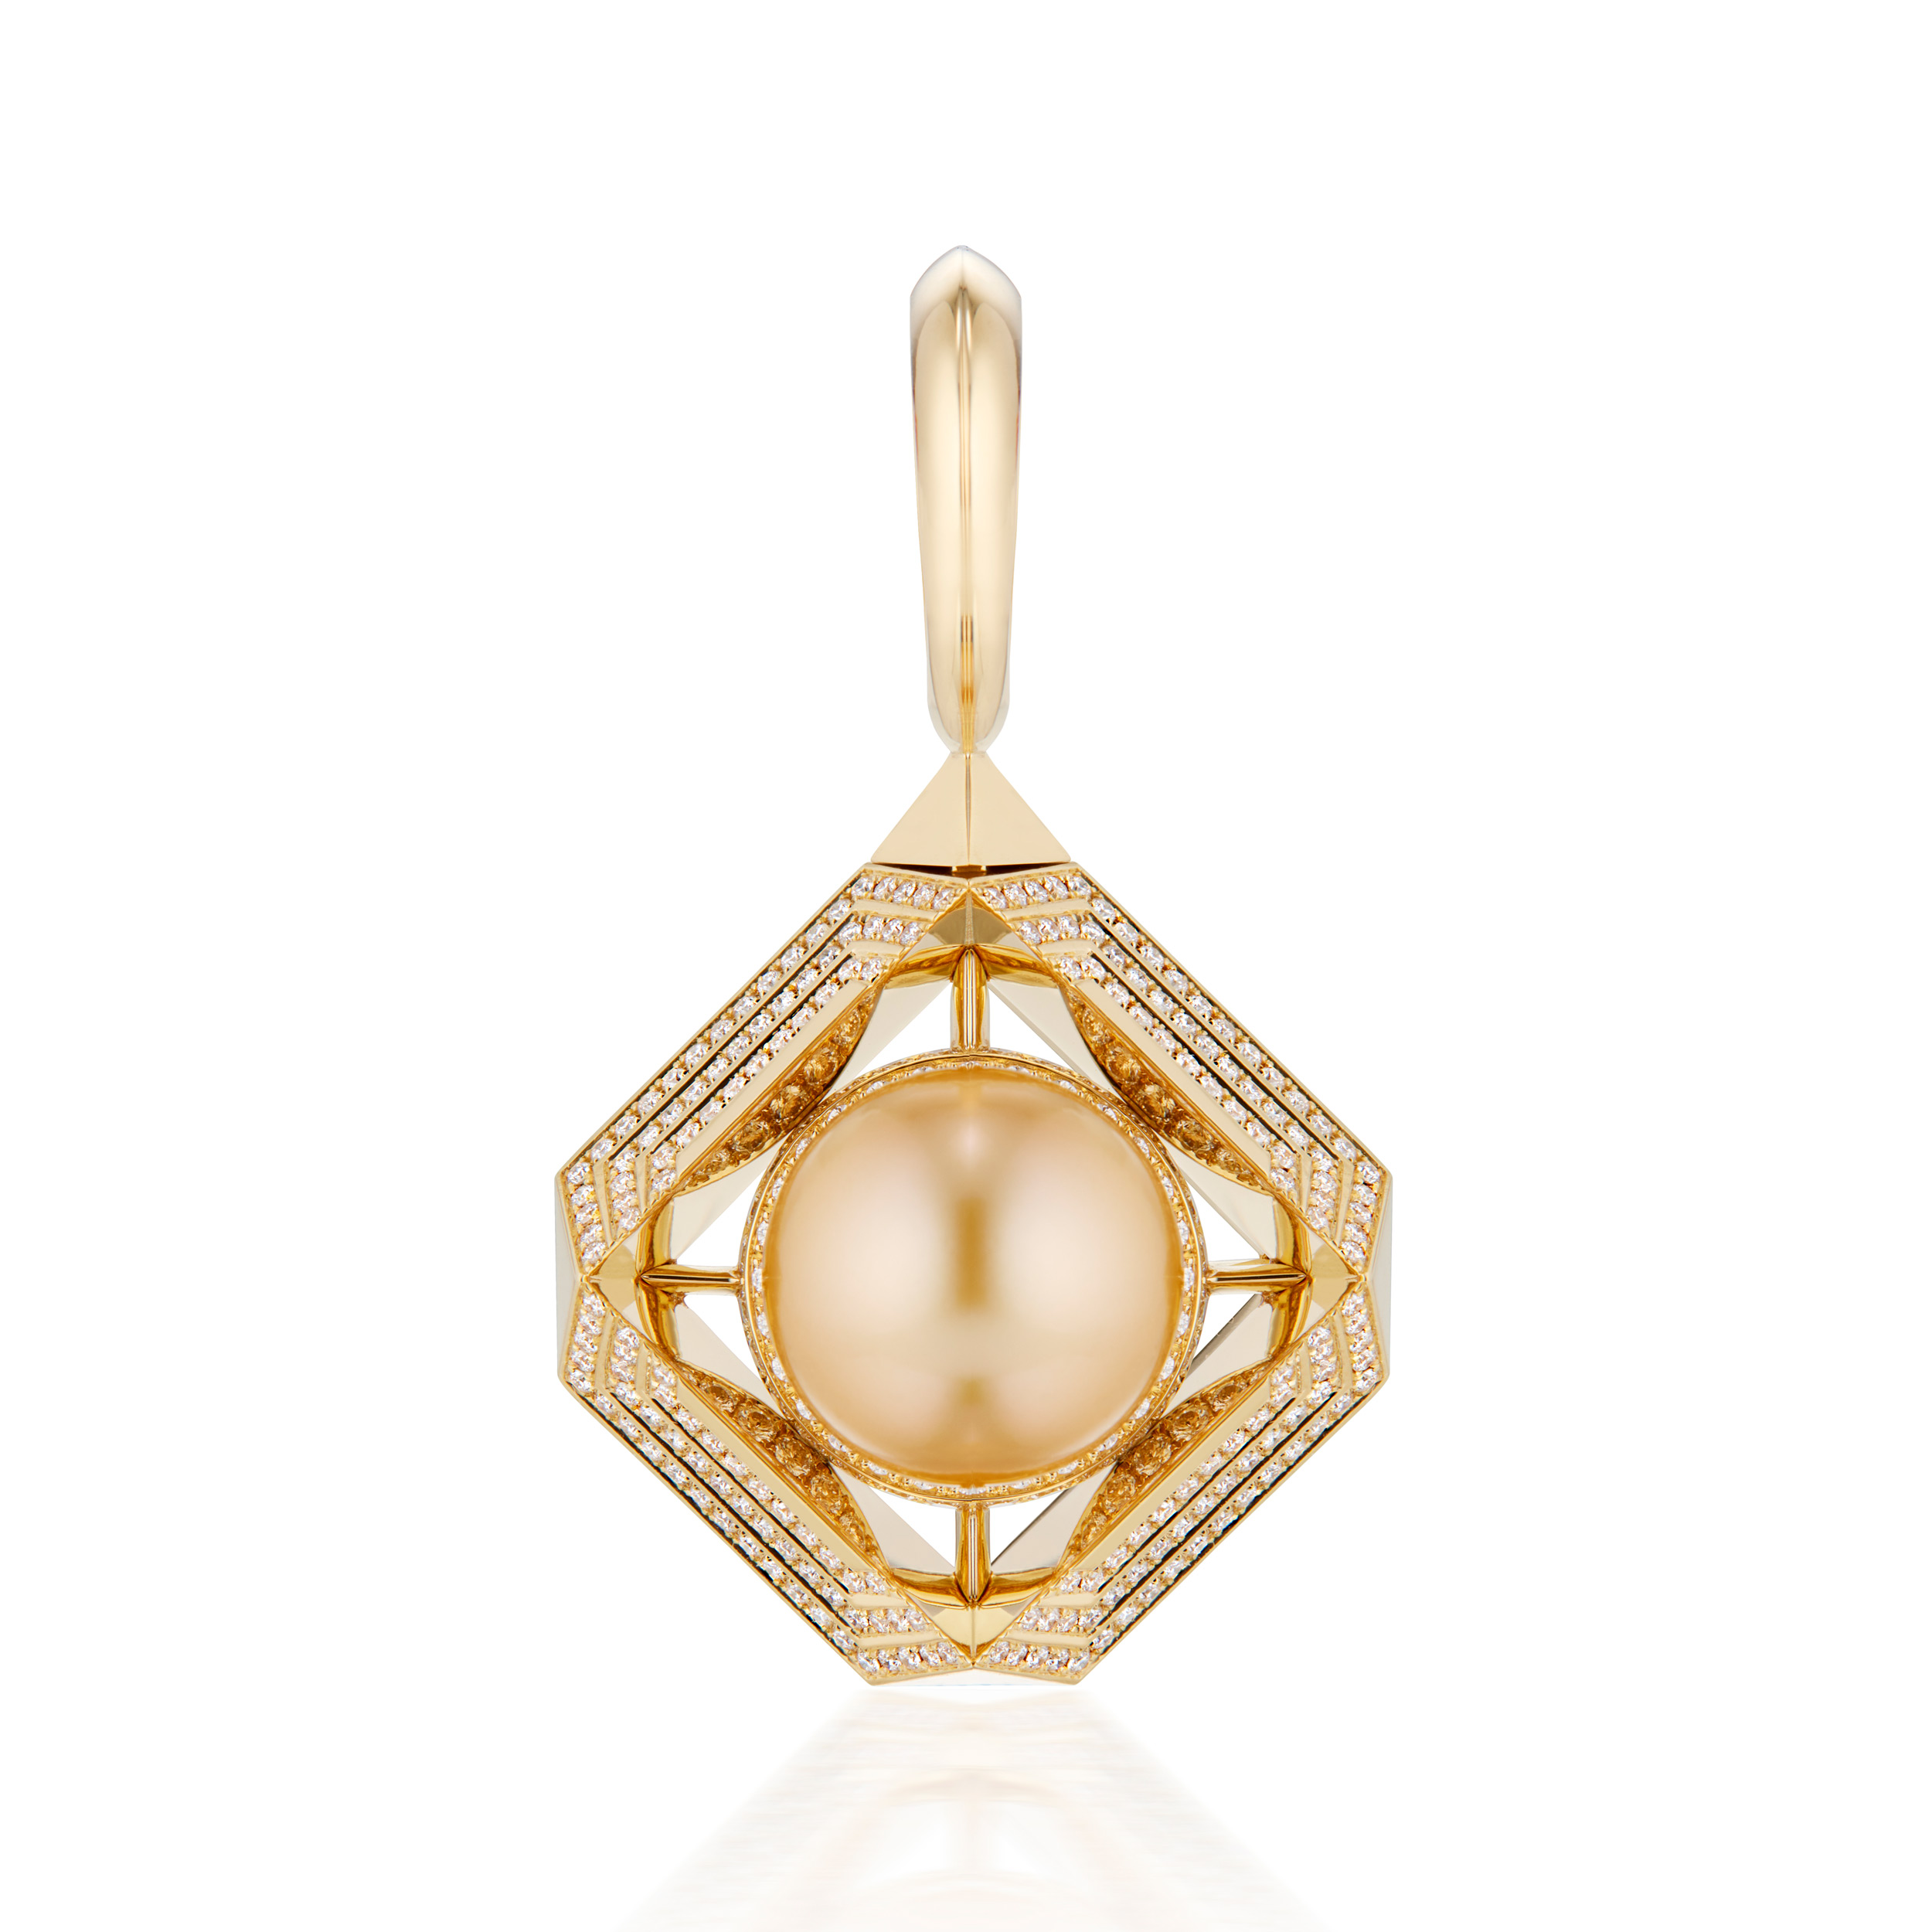 This is a large beautiful Guardian Gold Temple Pendant by Renisis, contains 18K yellow gold with a central golden South Sea Pearl framed with diamond patterns and geometric designs.